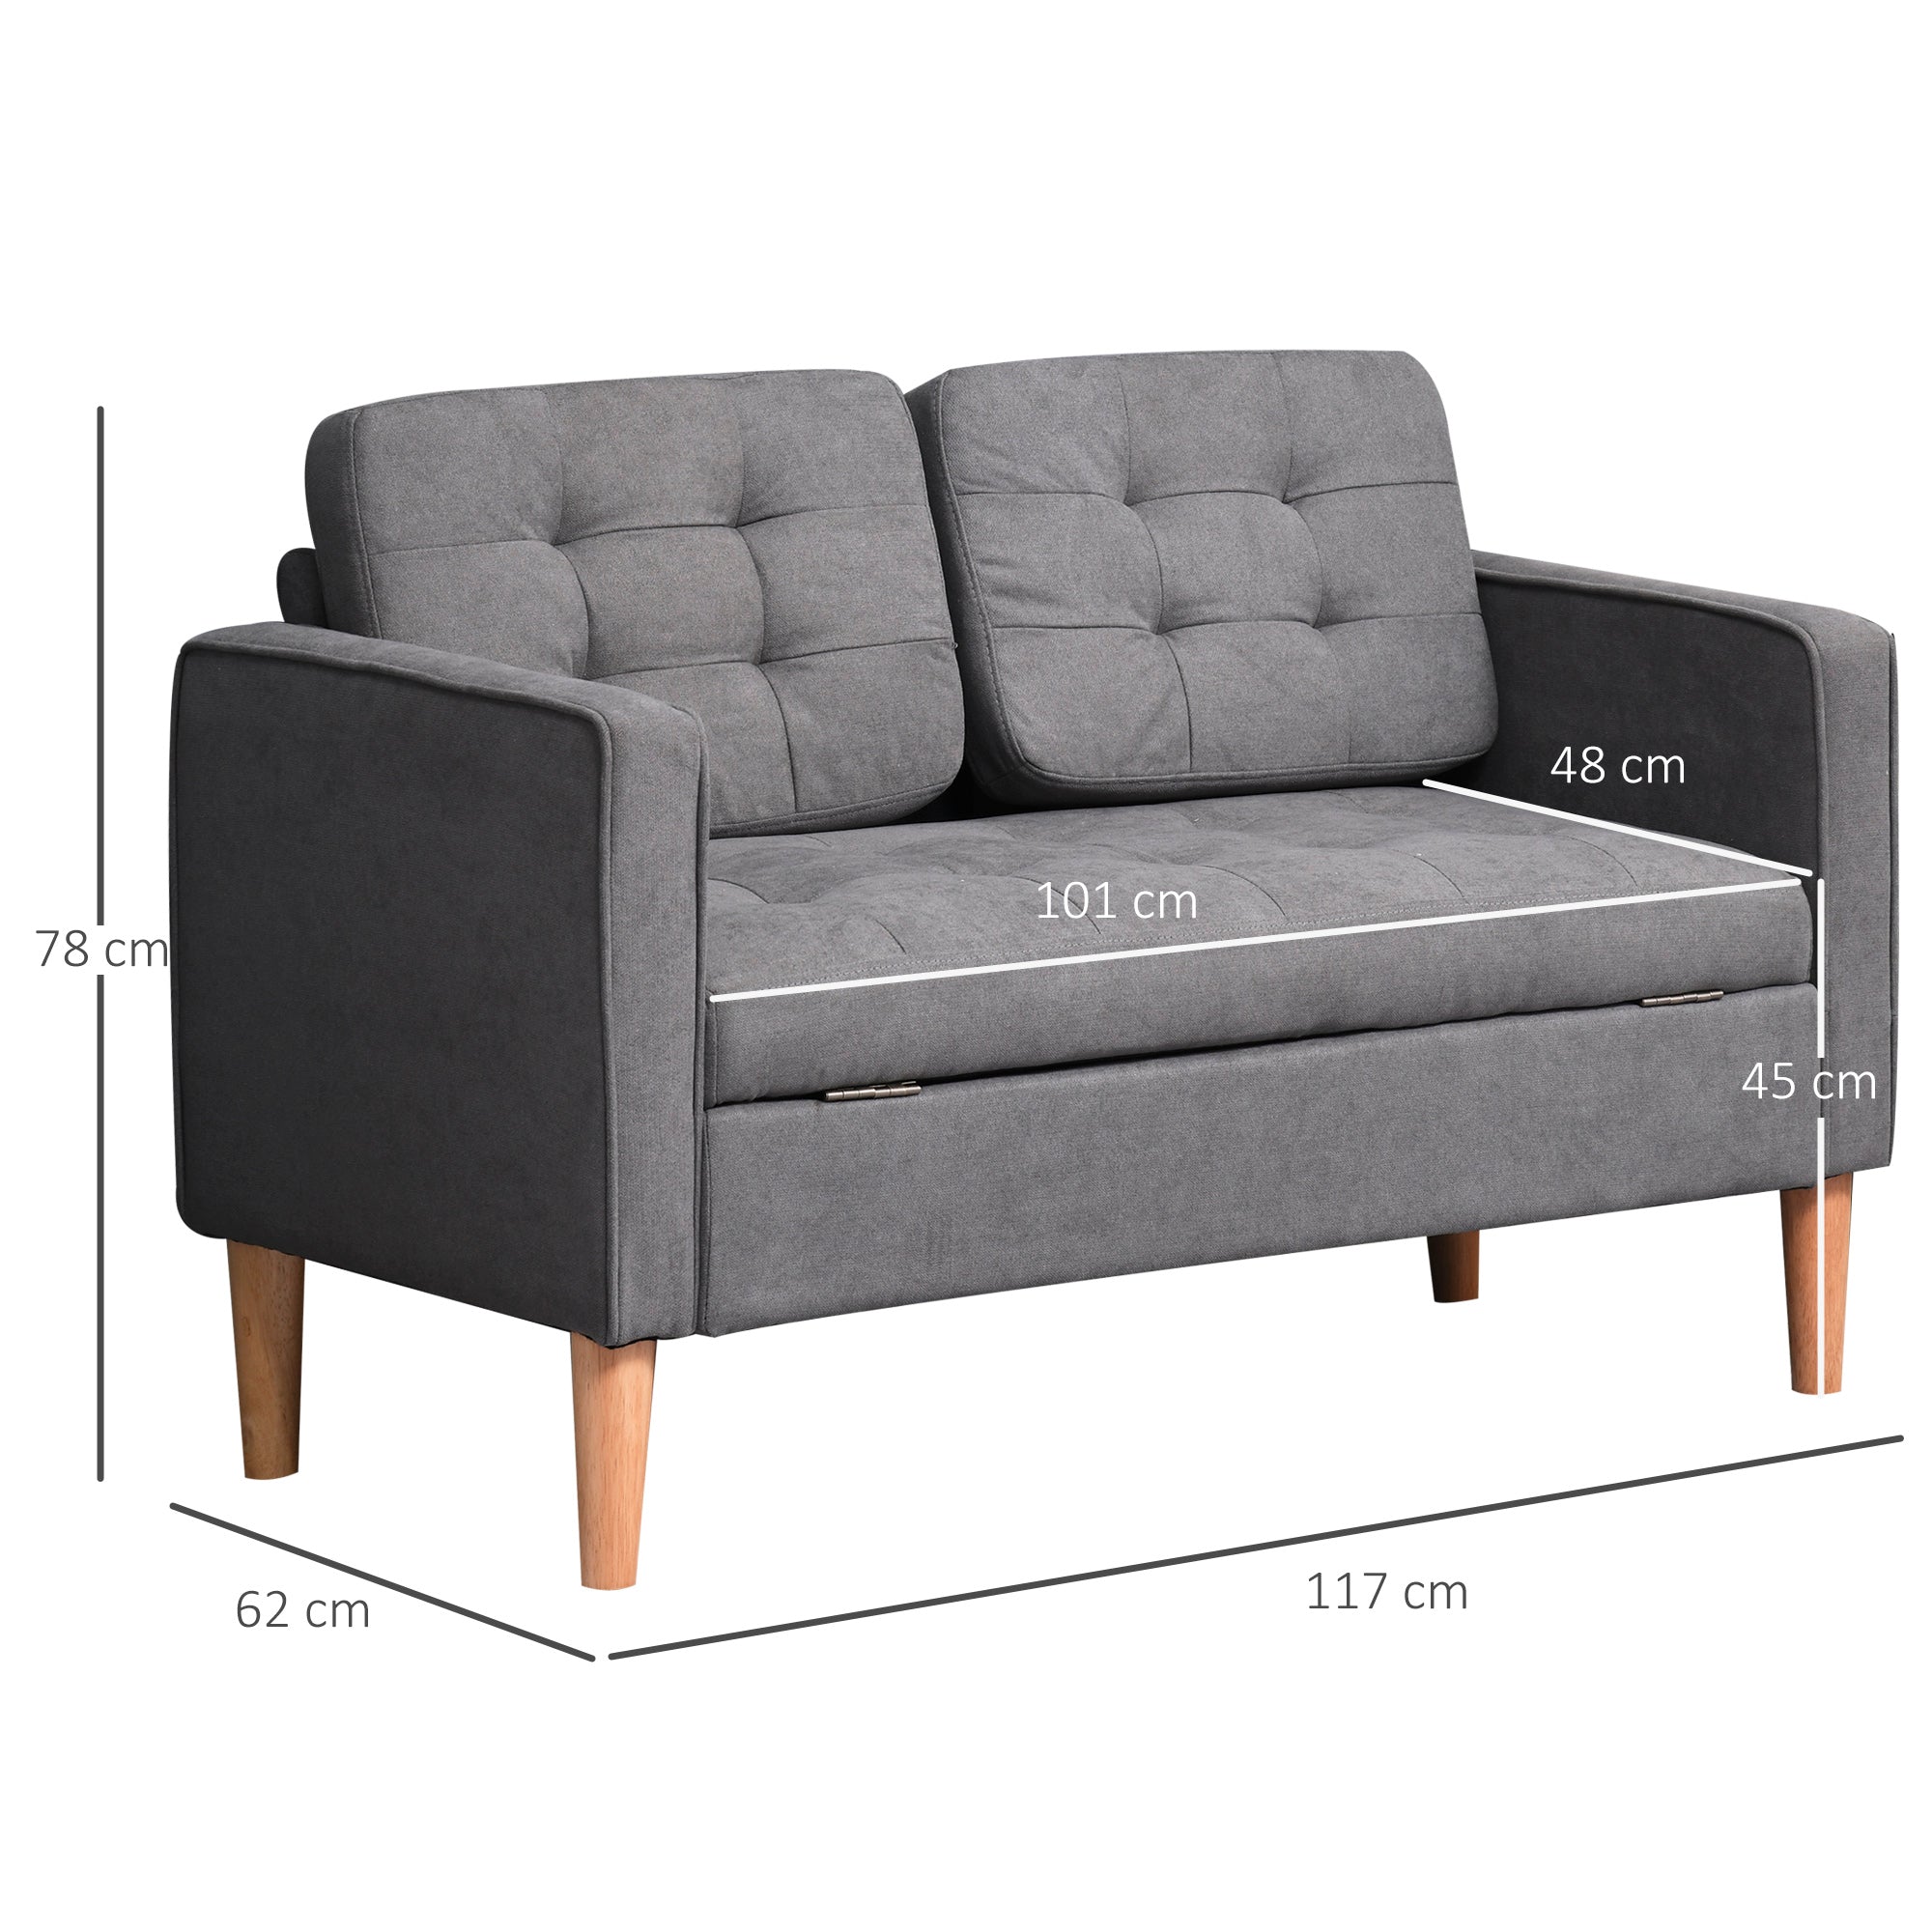 HOMCOM Modern 2 Seater Sofa with Hidden Storage, 117cm Tufted Cotton Couch, Compact Loveseat Sofa with Wood Legs, Grey - TovaHaus